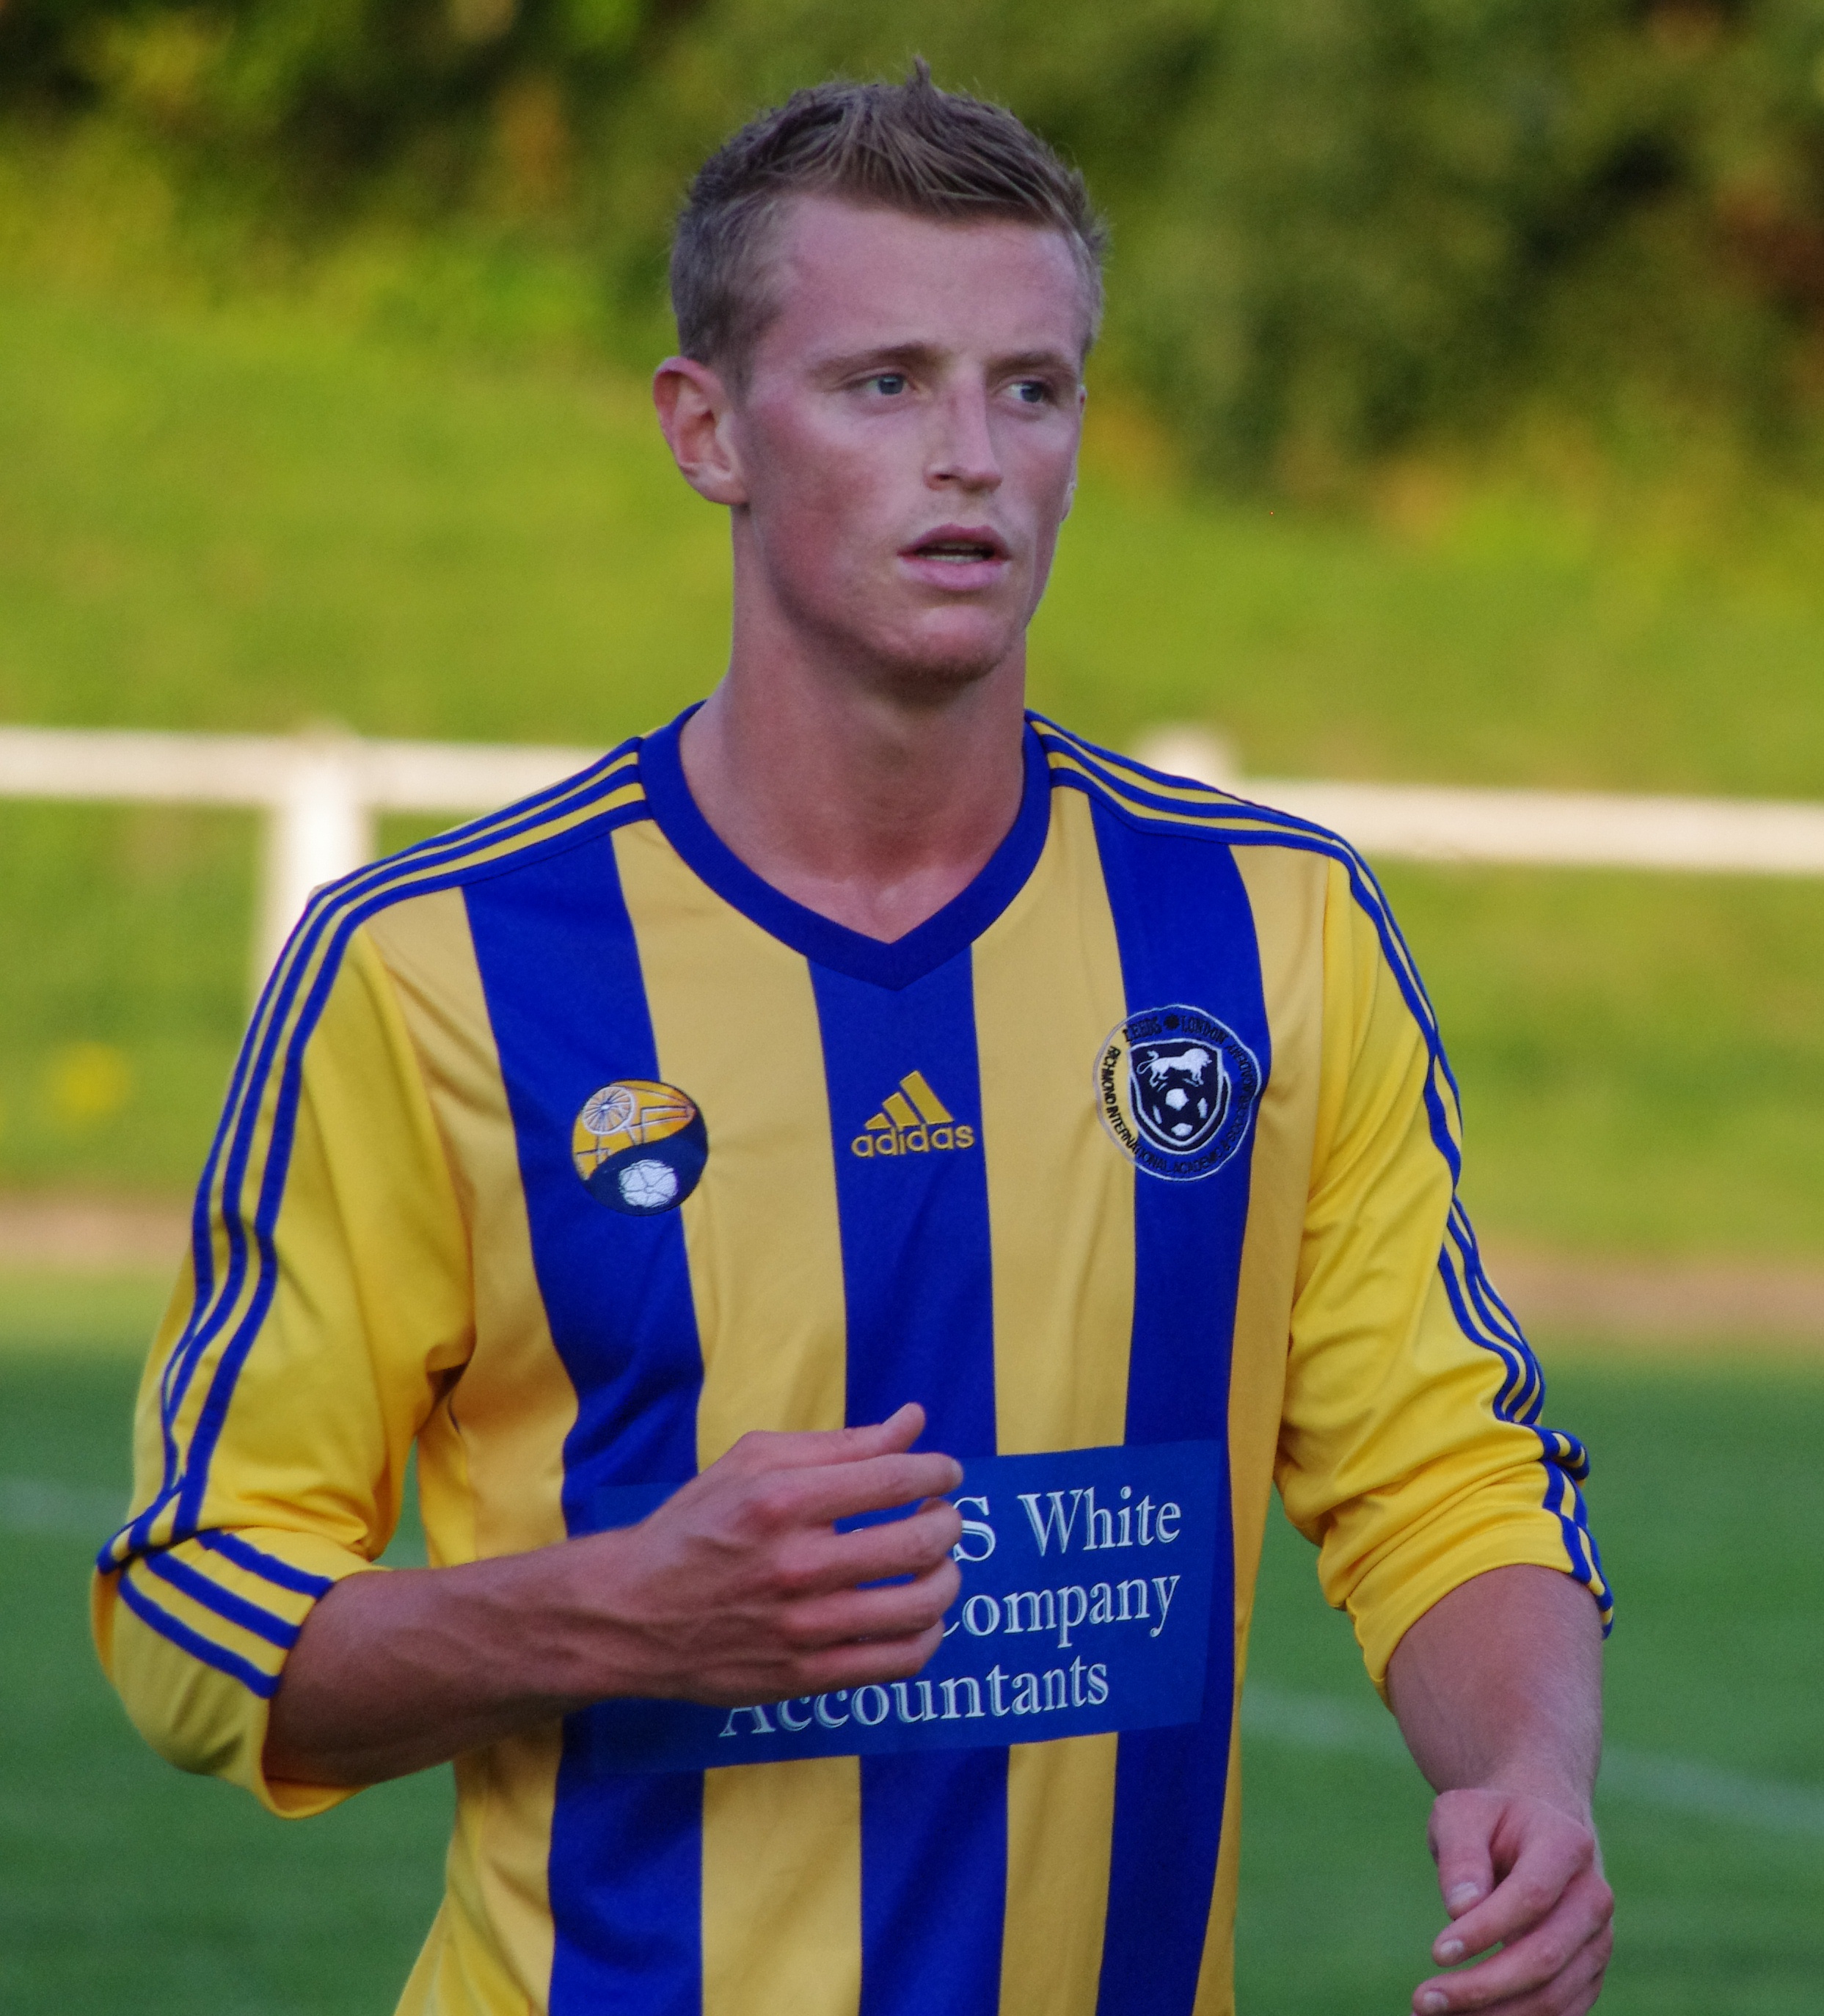 Nick Black's goal earned Garforth Town a 1-0 win at Athersley Recreation